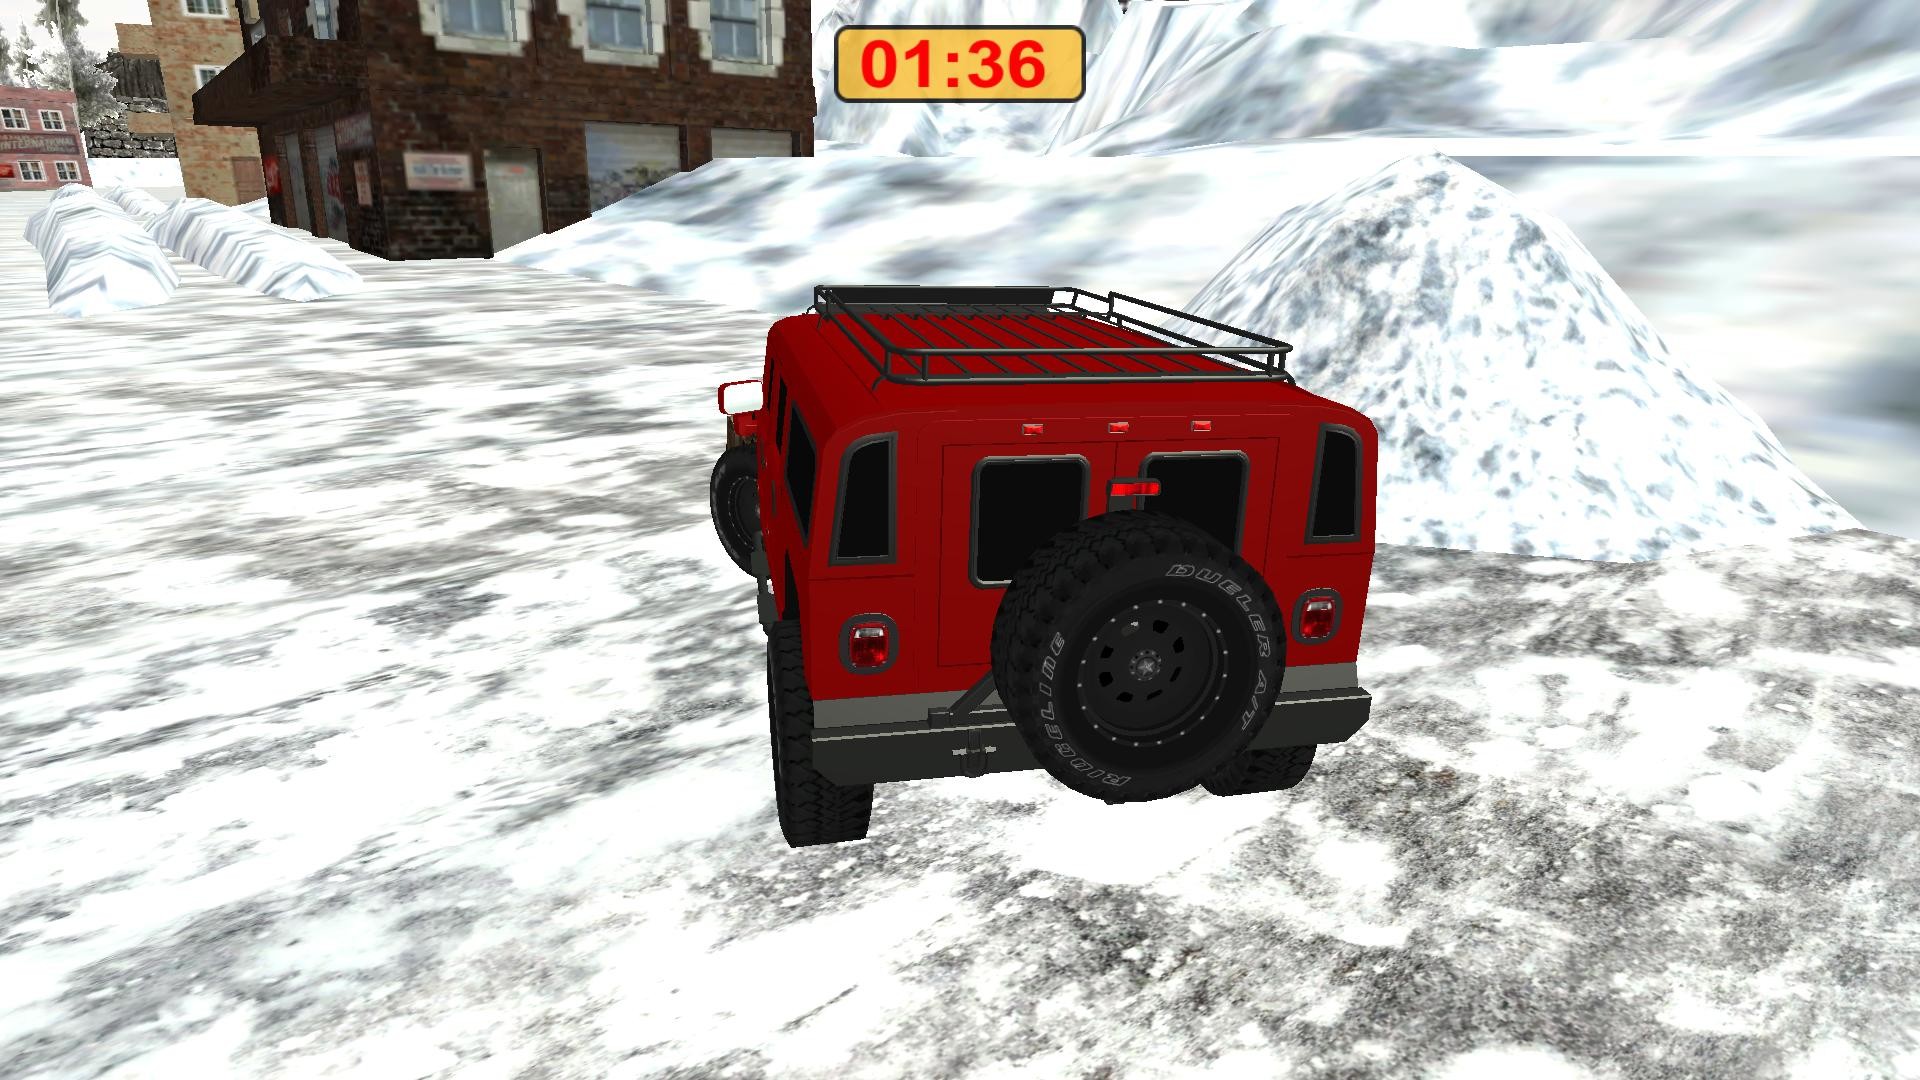 Snow Clearing Driving Simulator Steam CD Key, $5.12